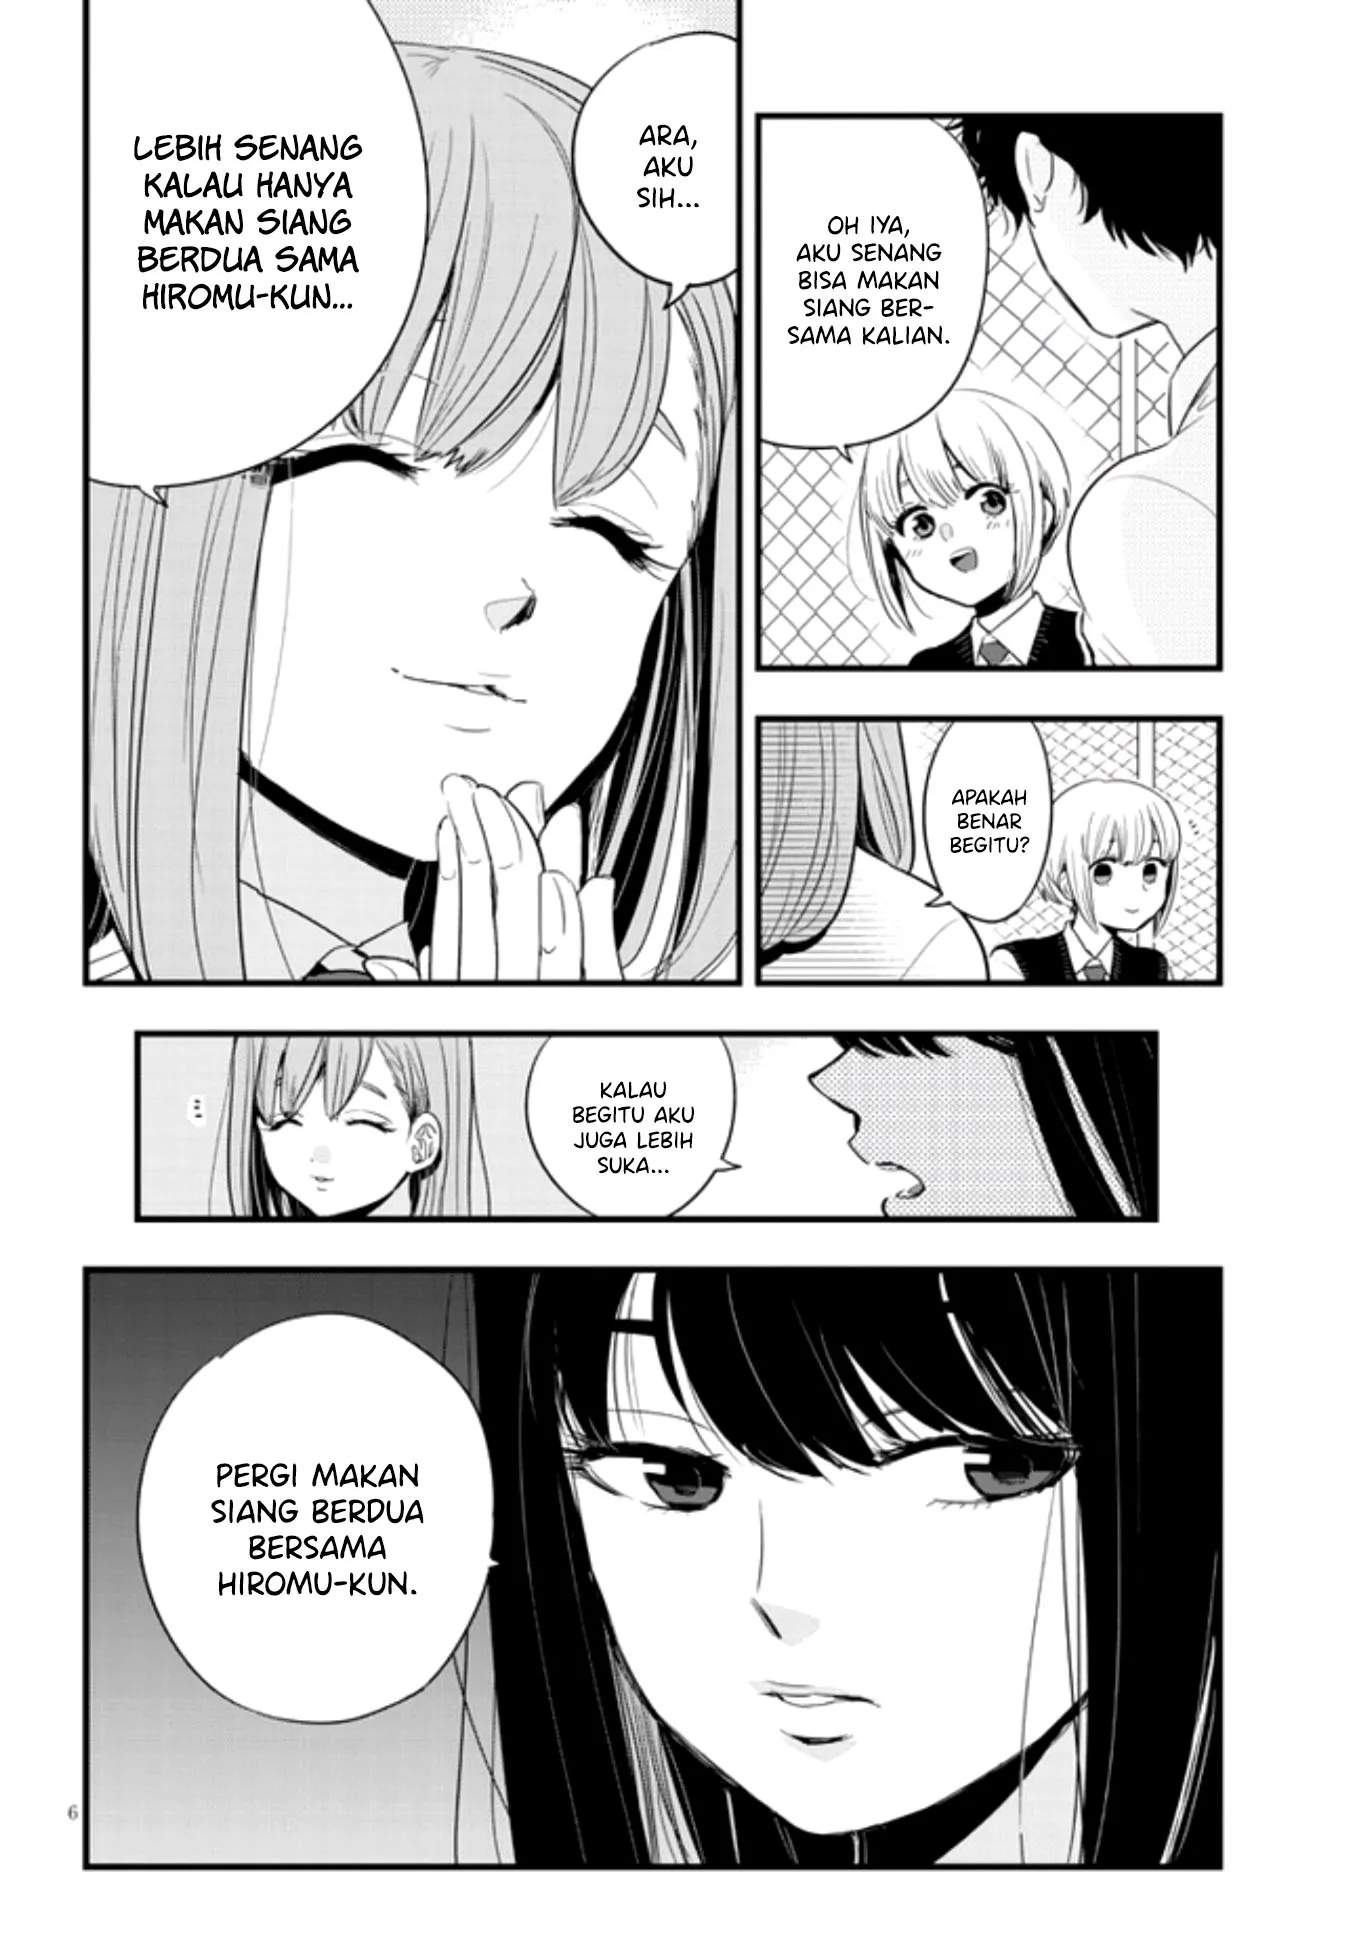 At That Time, The Battle Began (Yandere x Yandere) Chapter 12